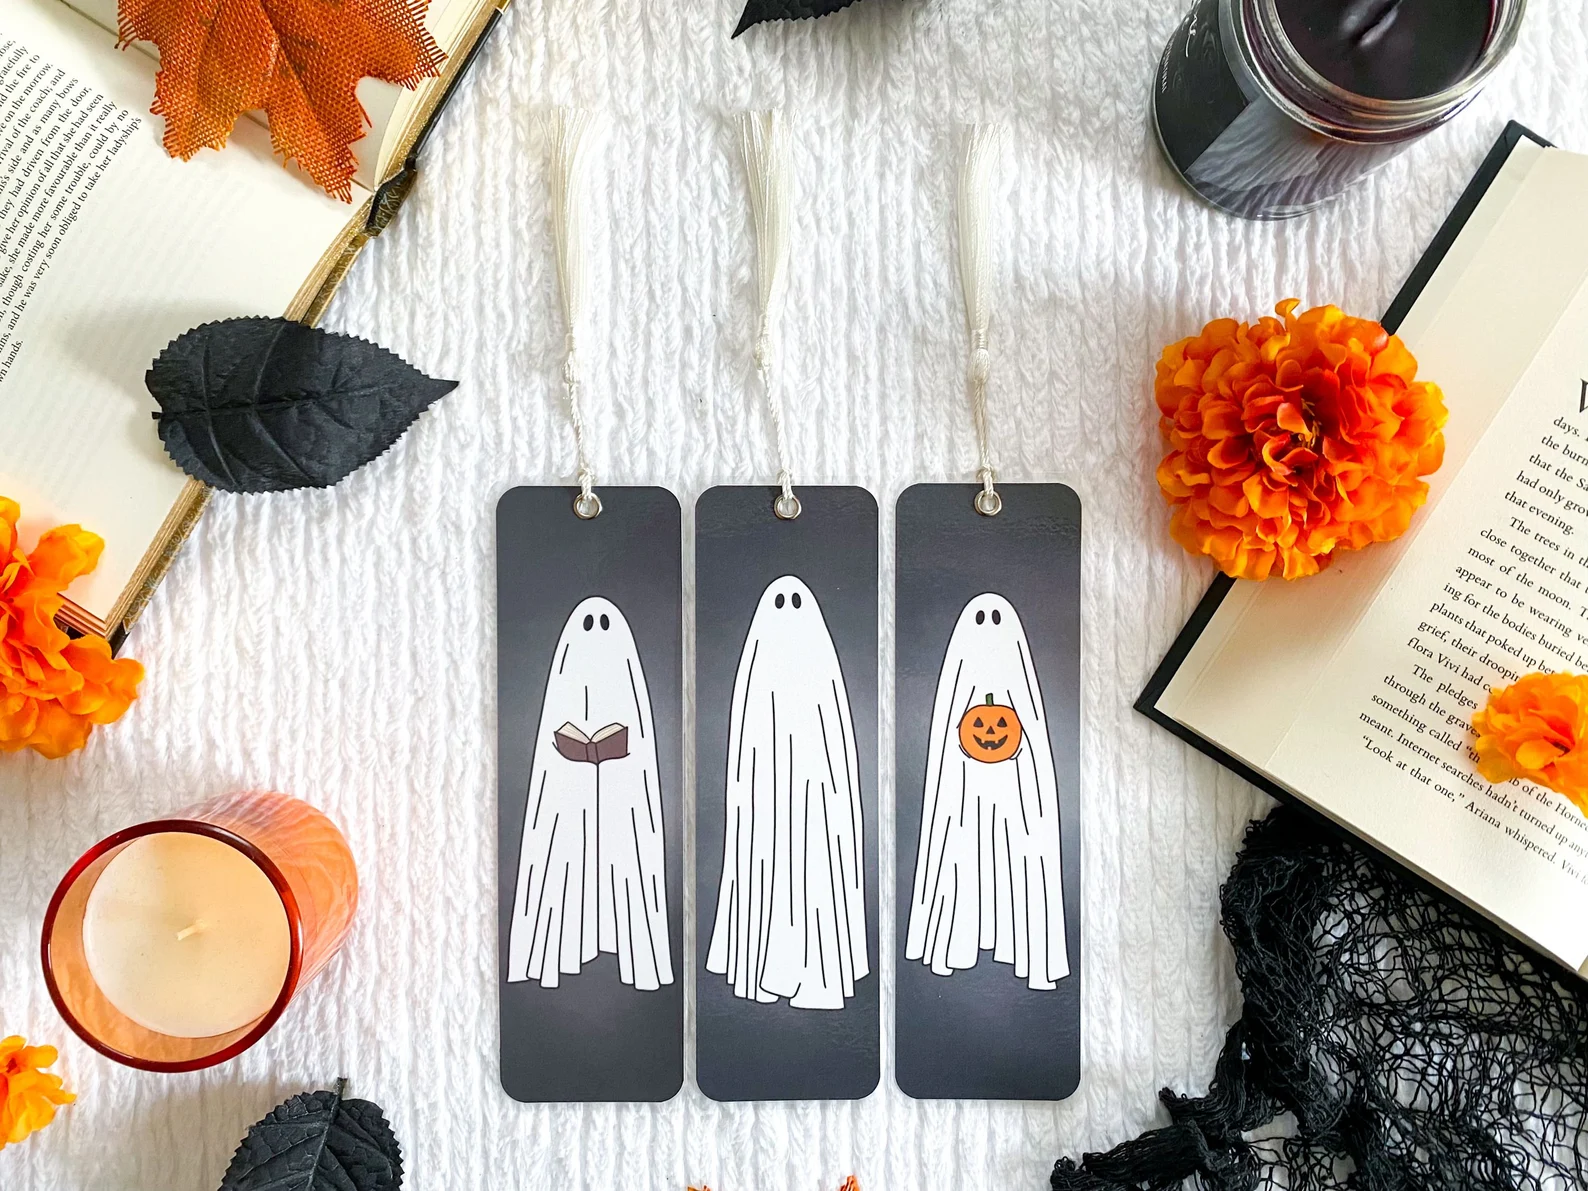 Set of three bookmarks depicting sheet ghosts, one holding a book and another holding a pumpkin